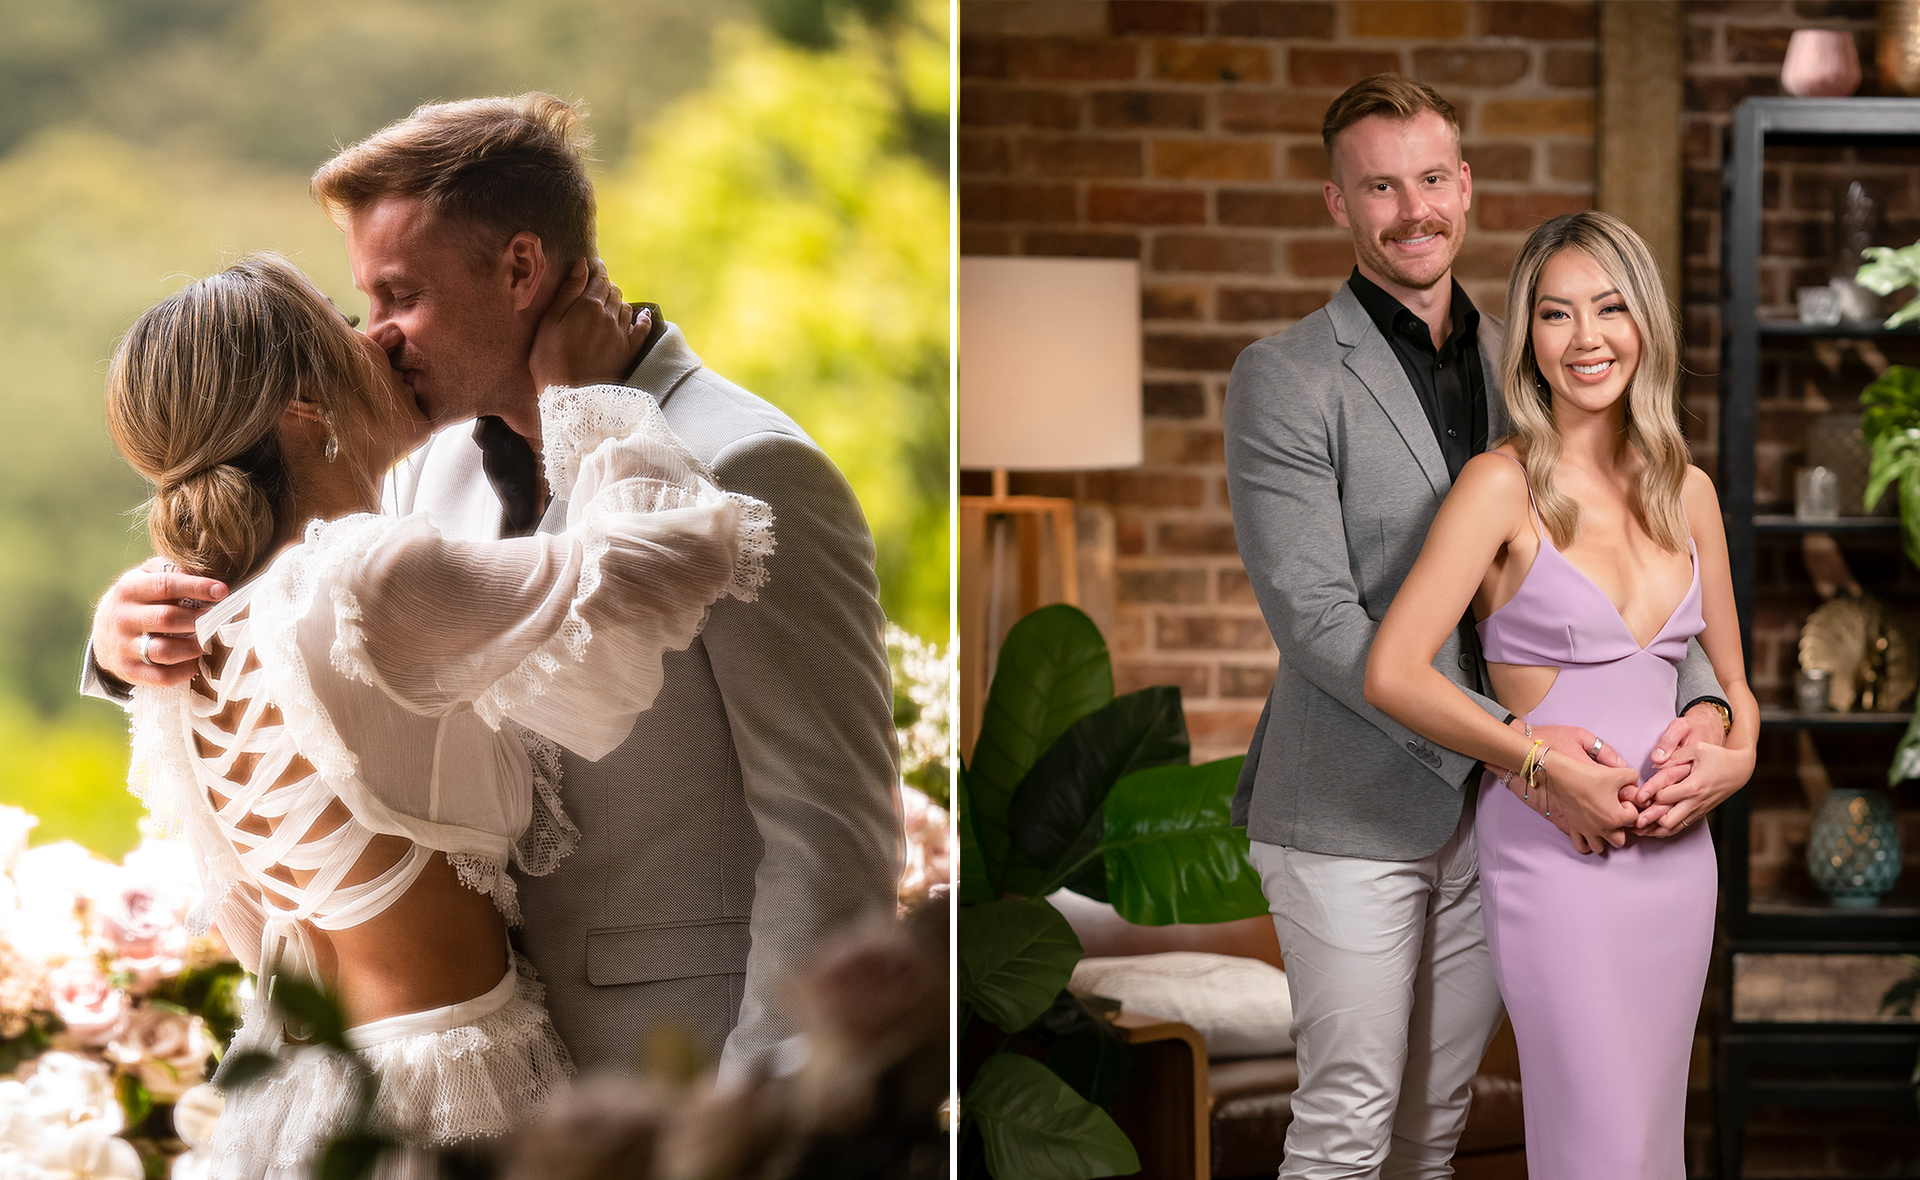 MAFS’ Selina Chhaur is left brutally blindsided after sudden break up with Cody Bromley